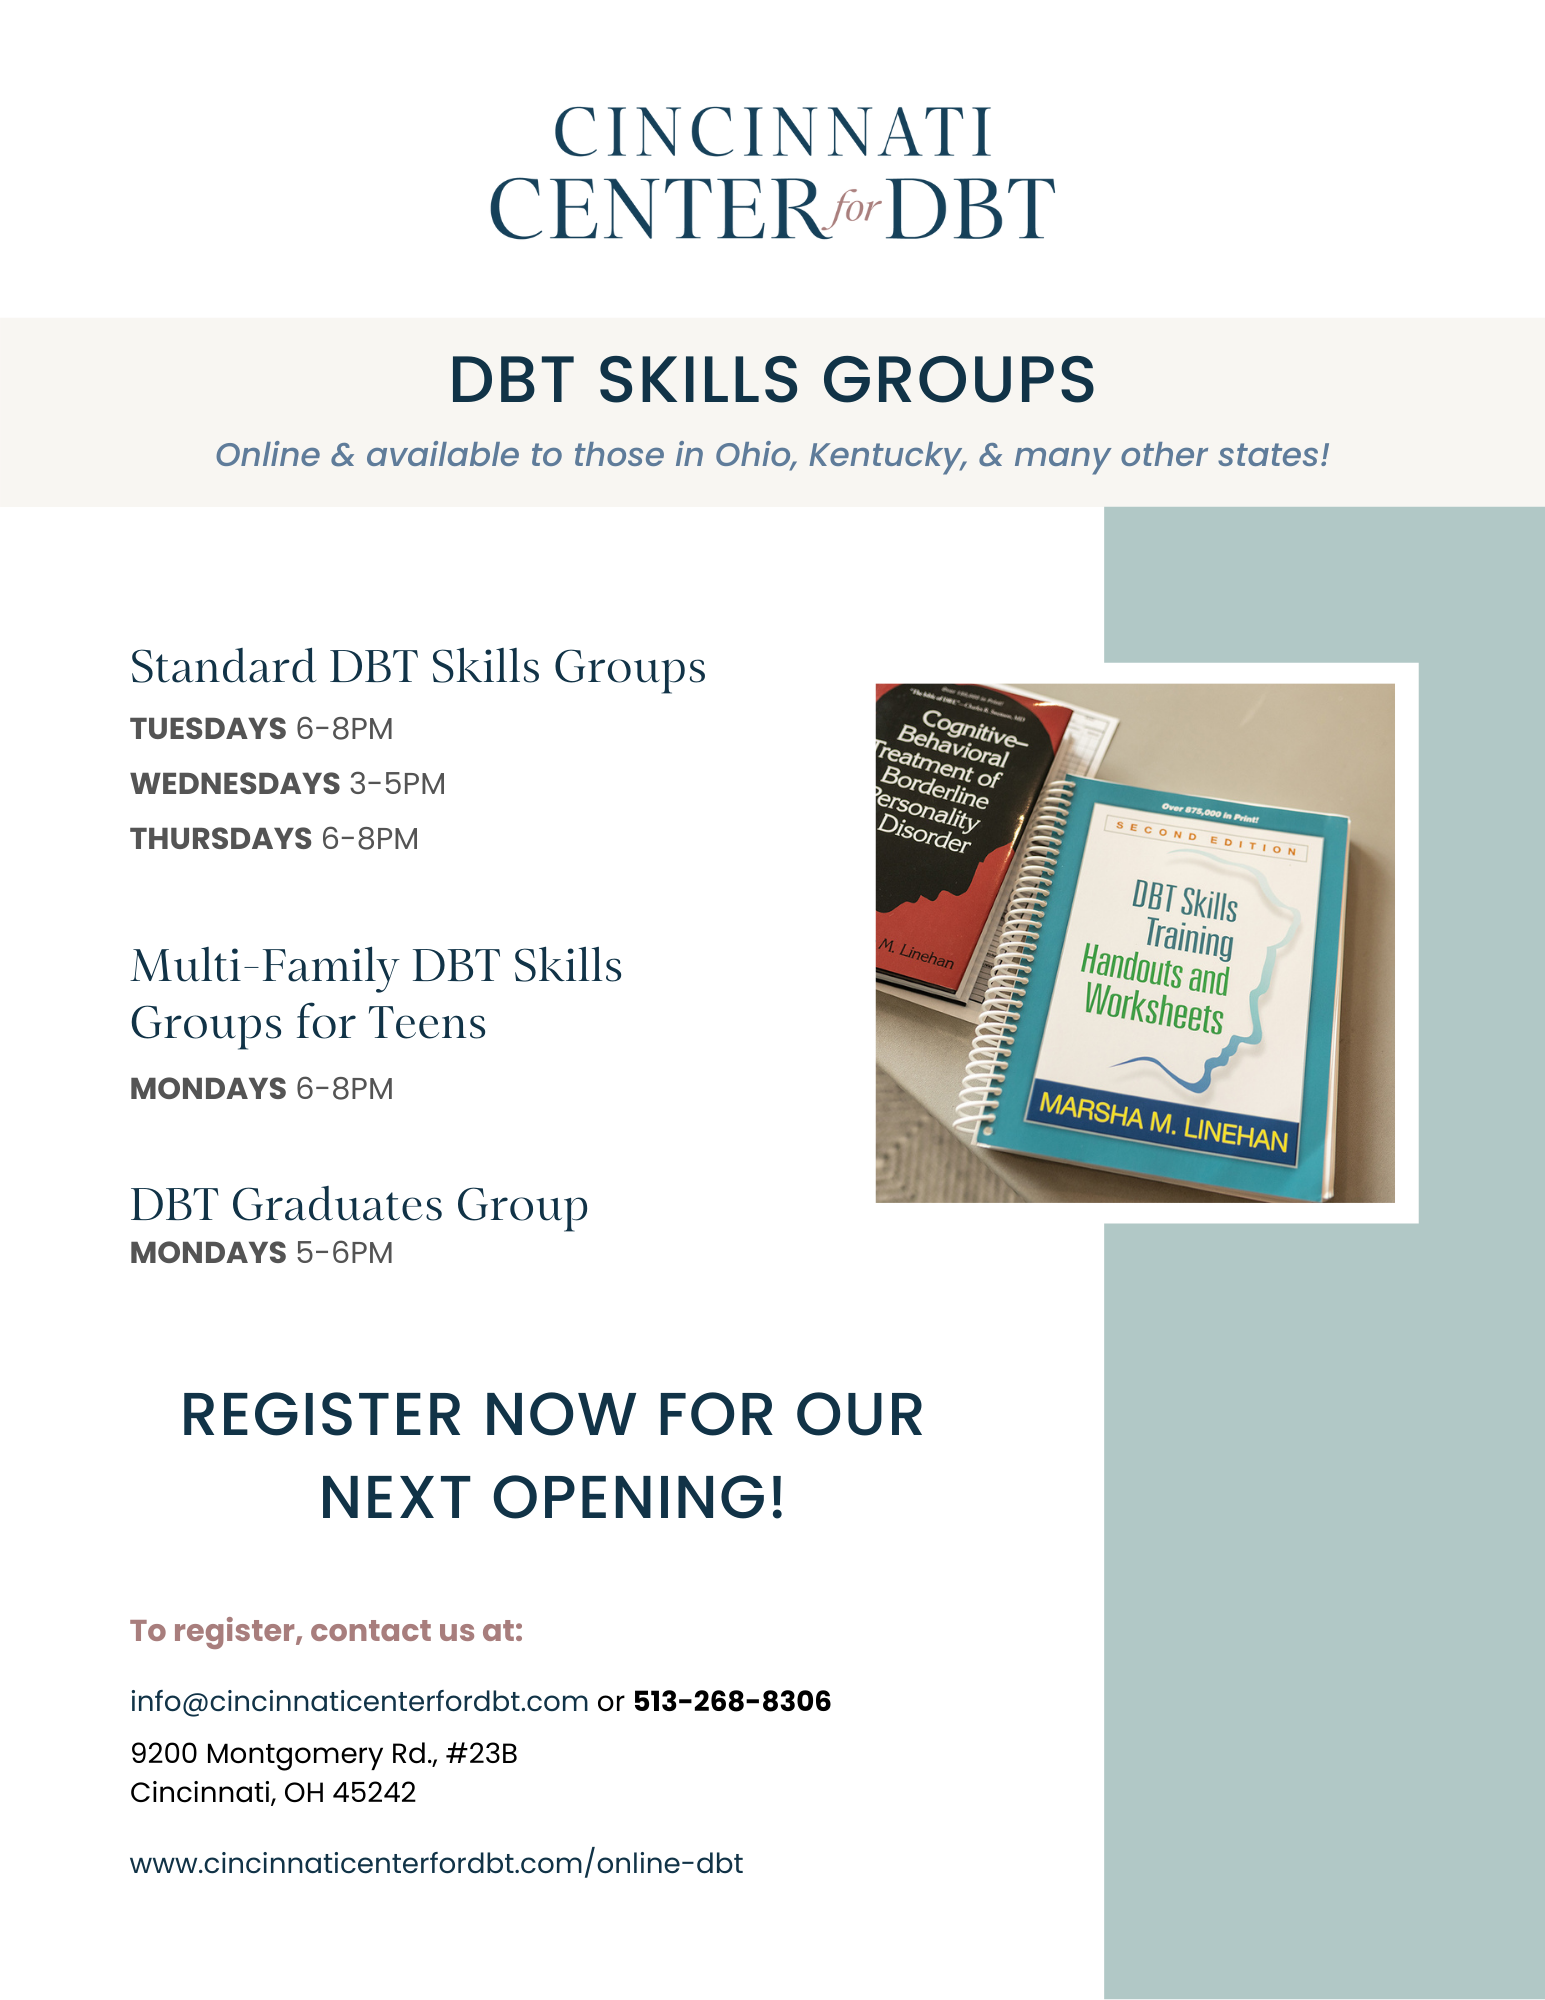 Flyer of all of the DBT skills offerings at Cincinnati Center for DBT, including adult skills group Tuesdays and Thursdays 6-8PM and Wednesdays 3-5PM and multi-familly DBT skills group for teens and a caregiver Mondays 6-8PM.